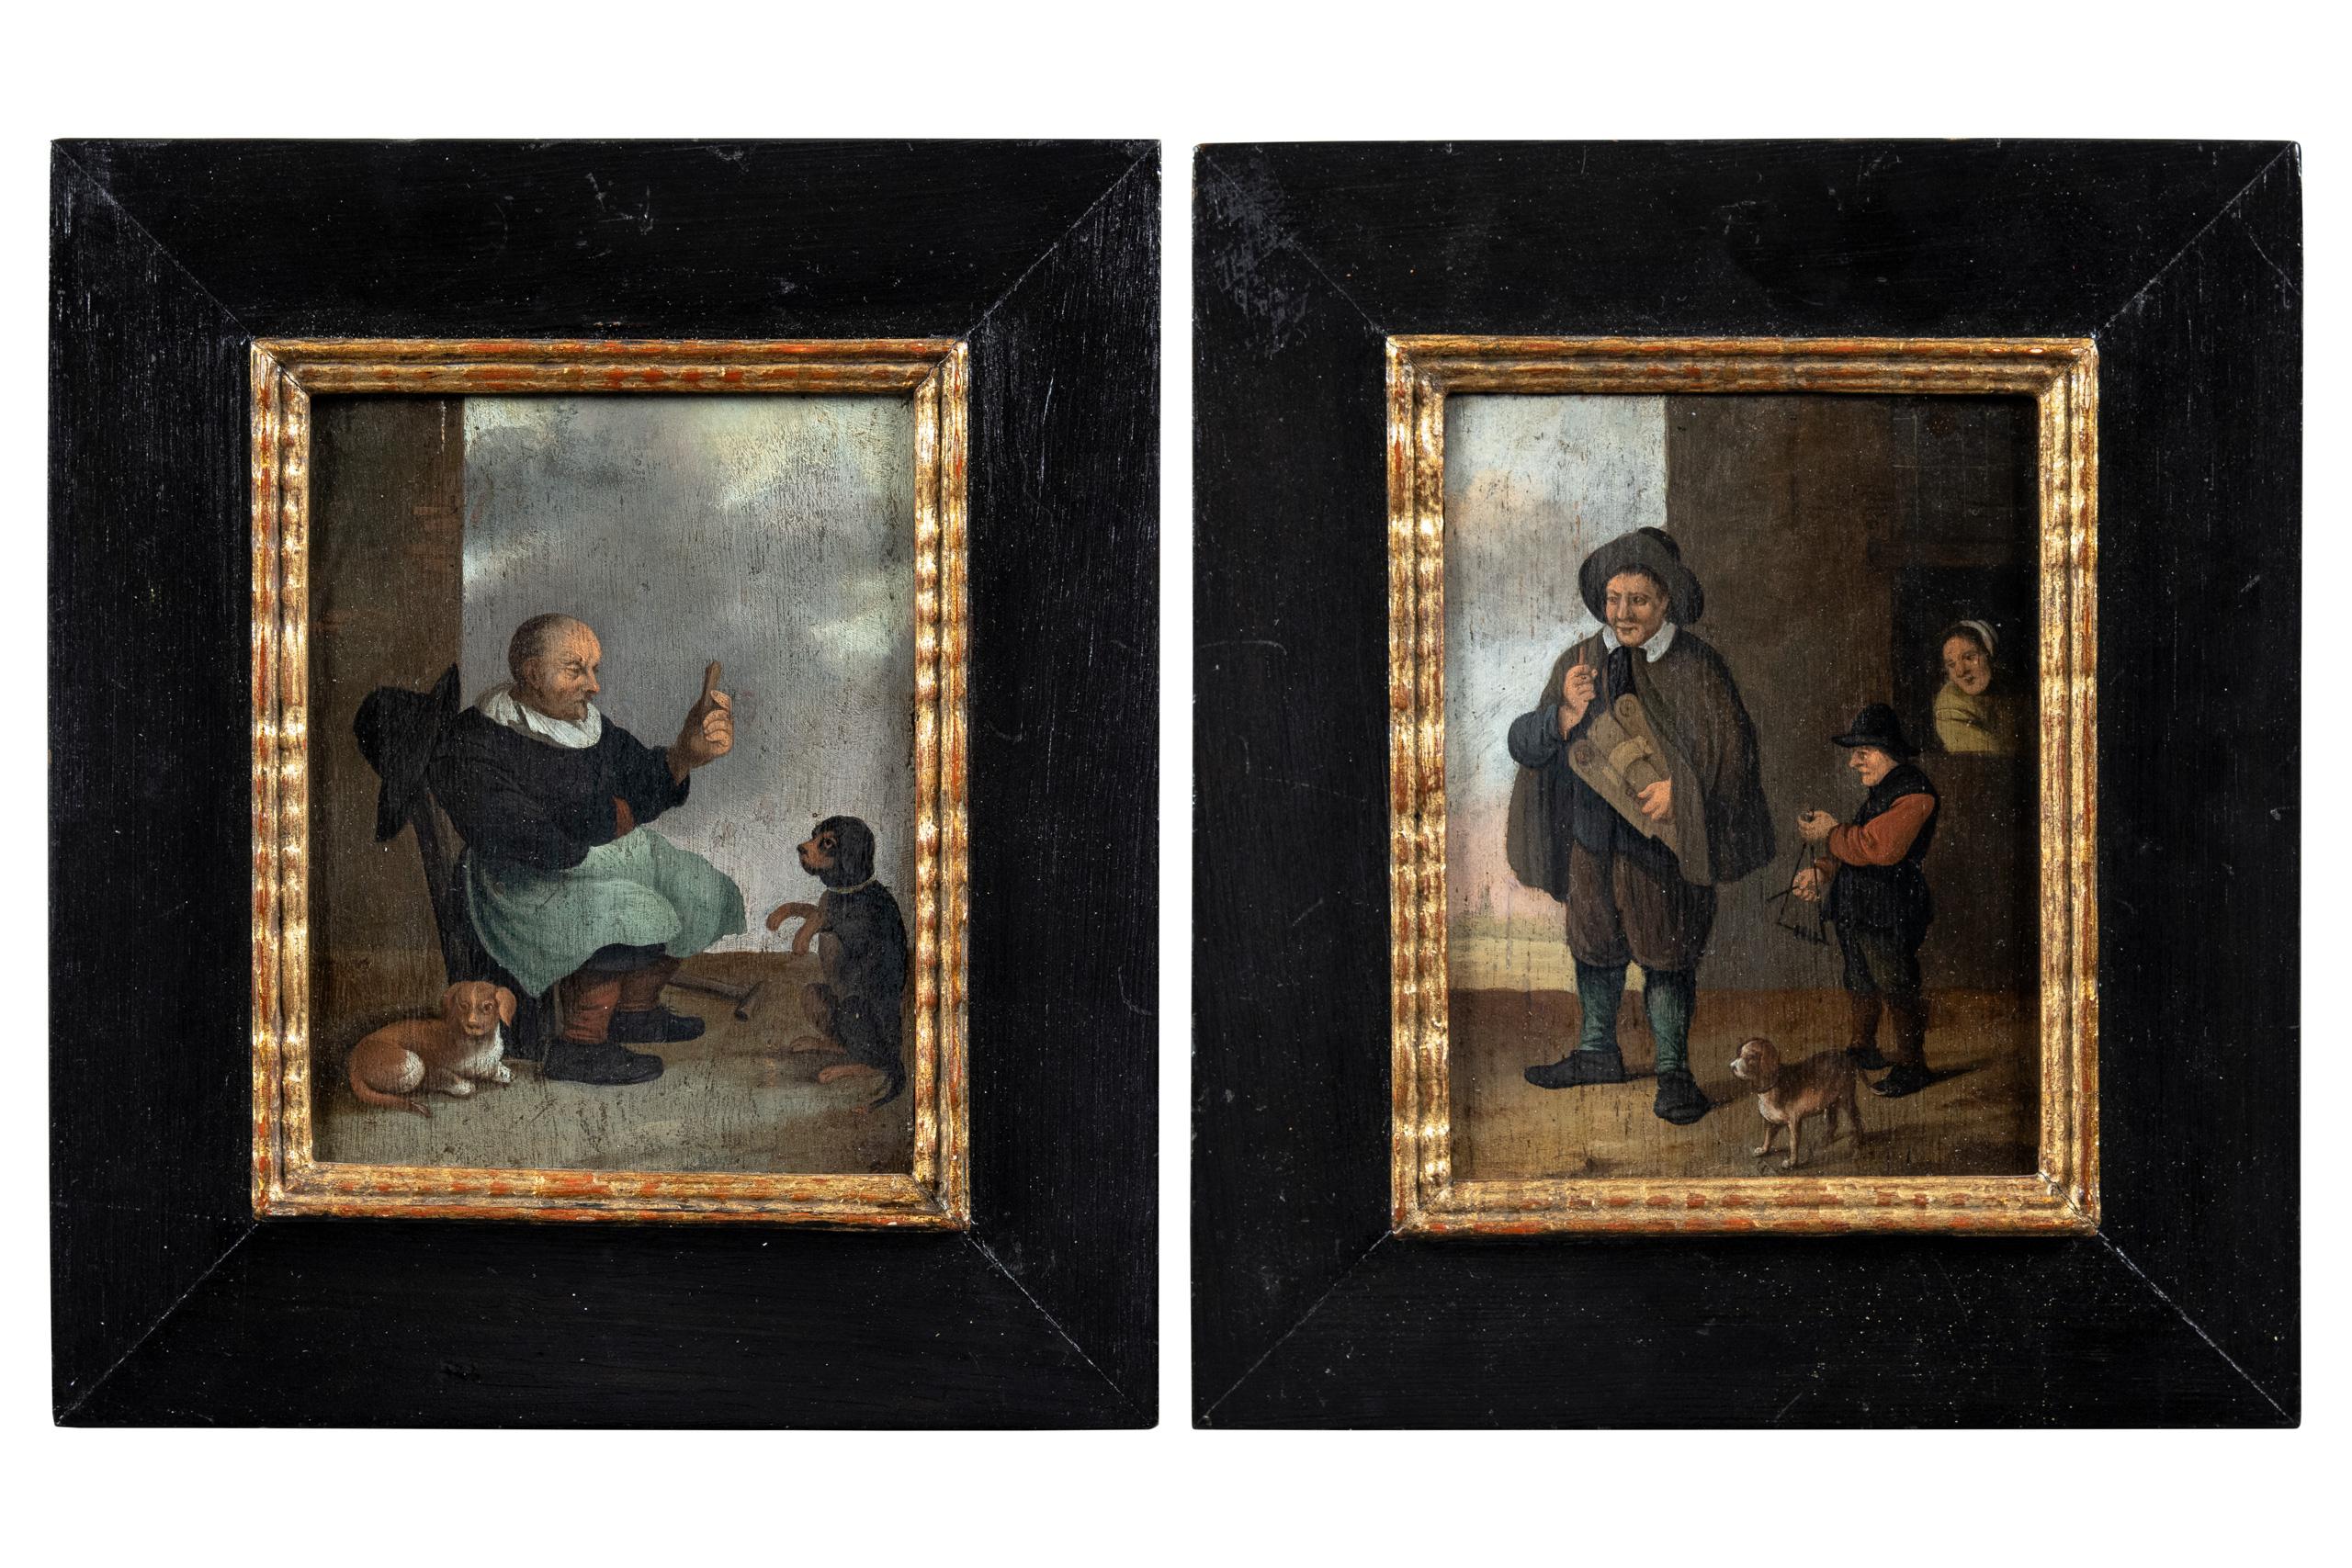 David Teniers the Younger Interior Painting - Pair of 17th-18th century Dutch paintings - Dogs figures - Oil on panel